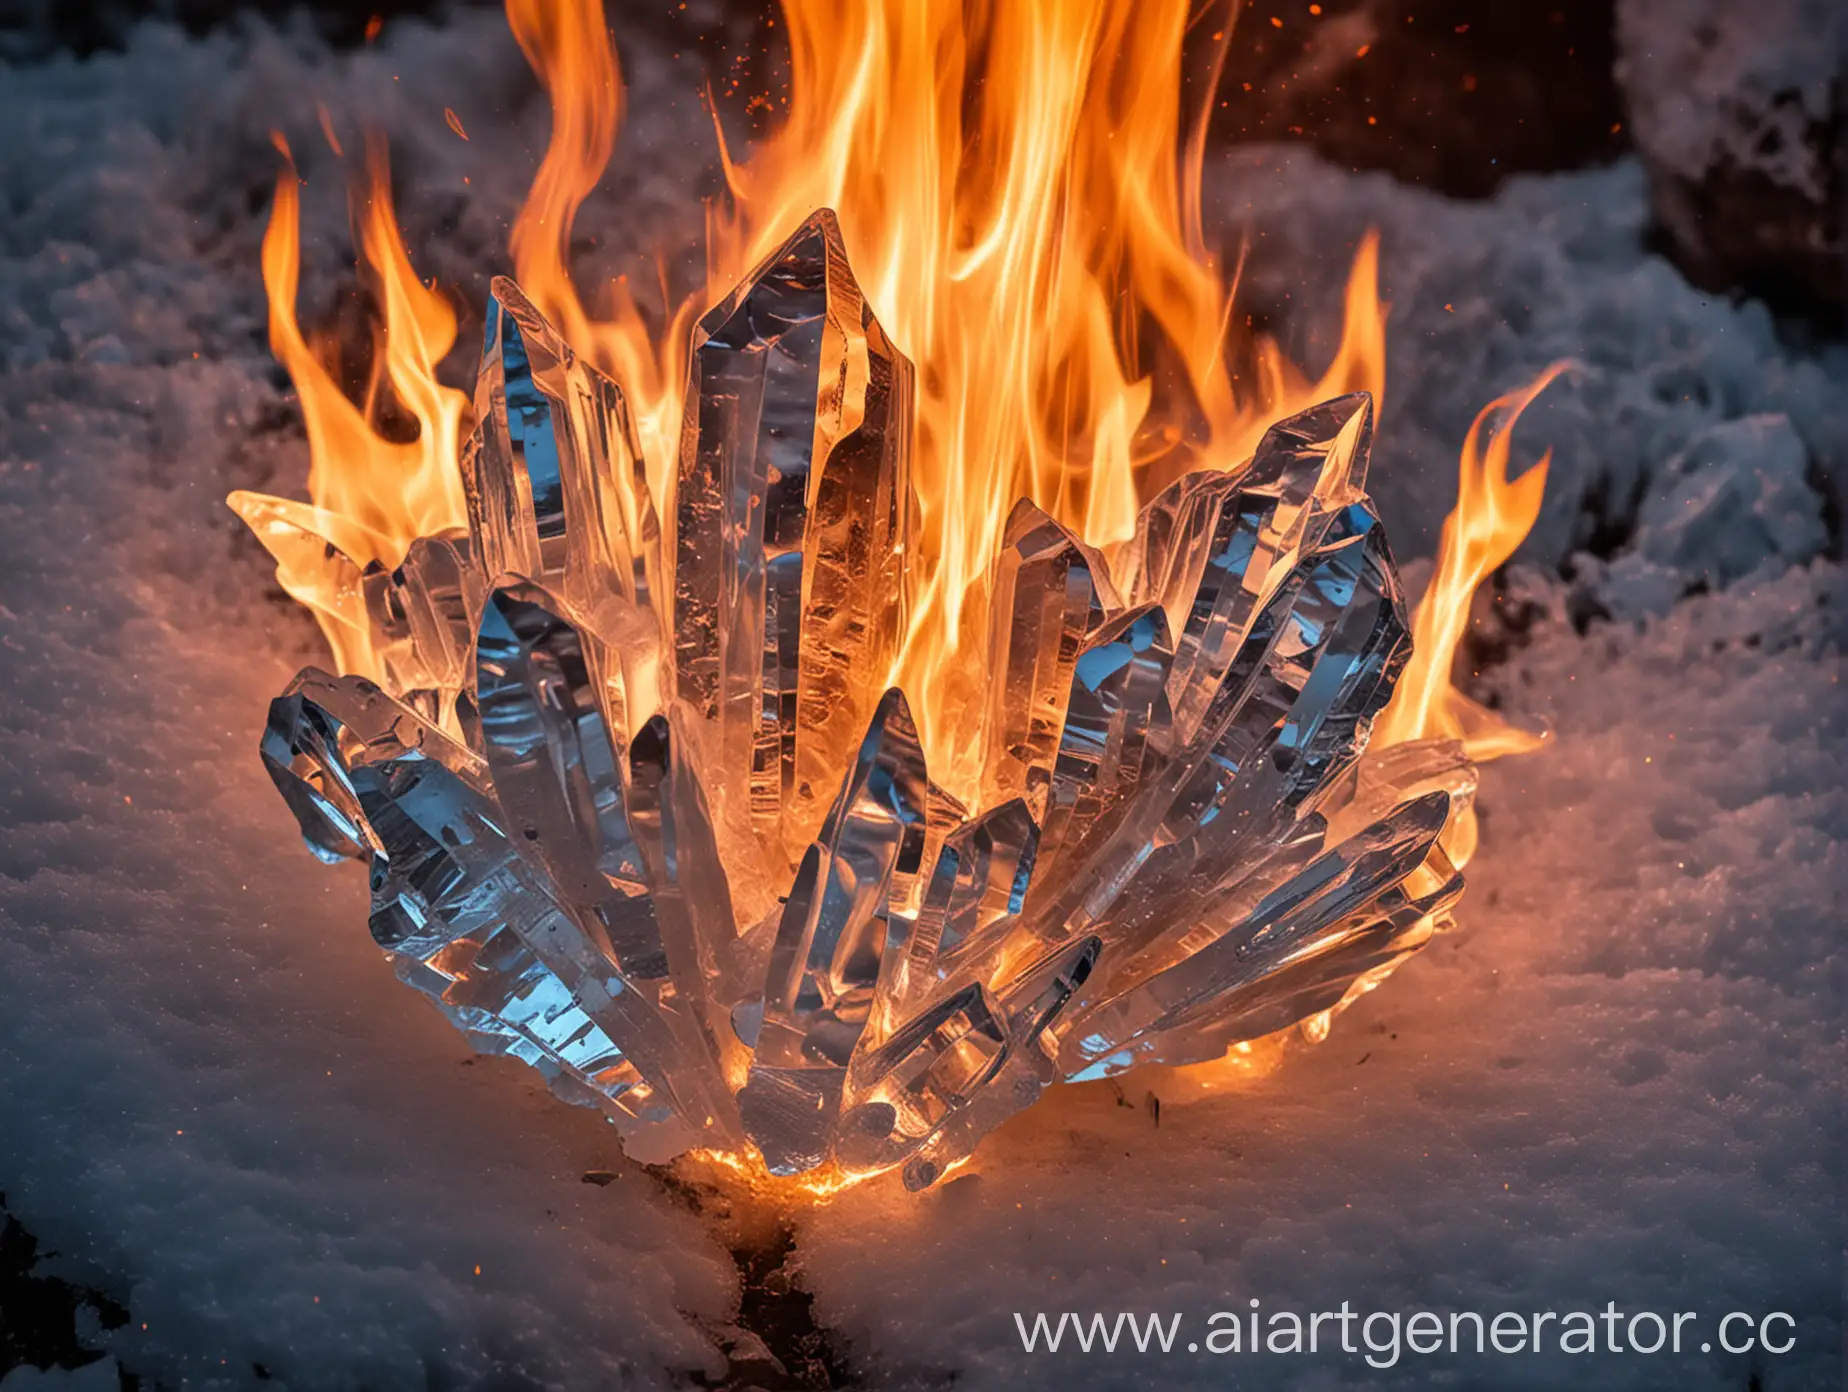 Contrasting-Elements-Ice-Crystals-Amidst-Fiery-Flames